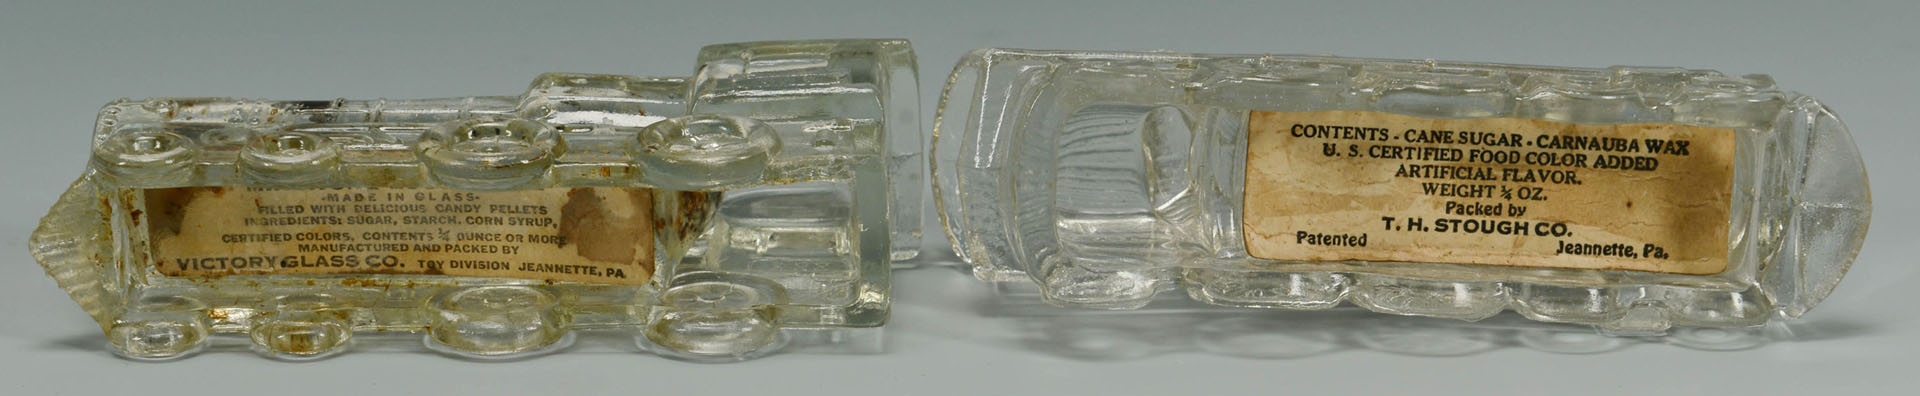 Lot 666: 32 American Glass Candy Containers